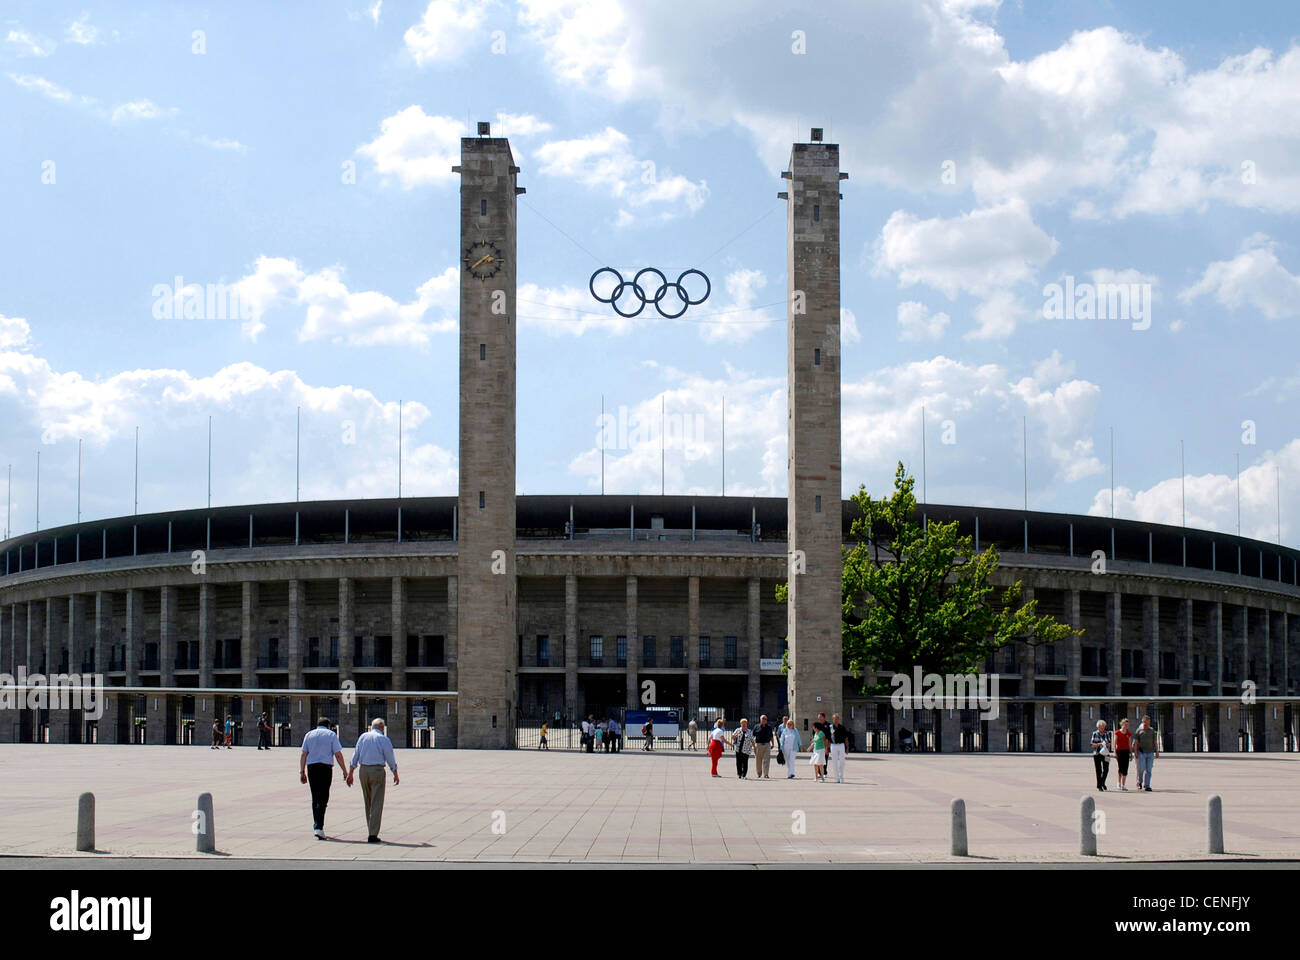 Olympic stadium in Berlin with the Olympic rings over the main entrance. Stock Photo